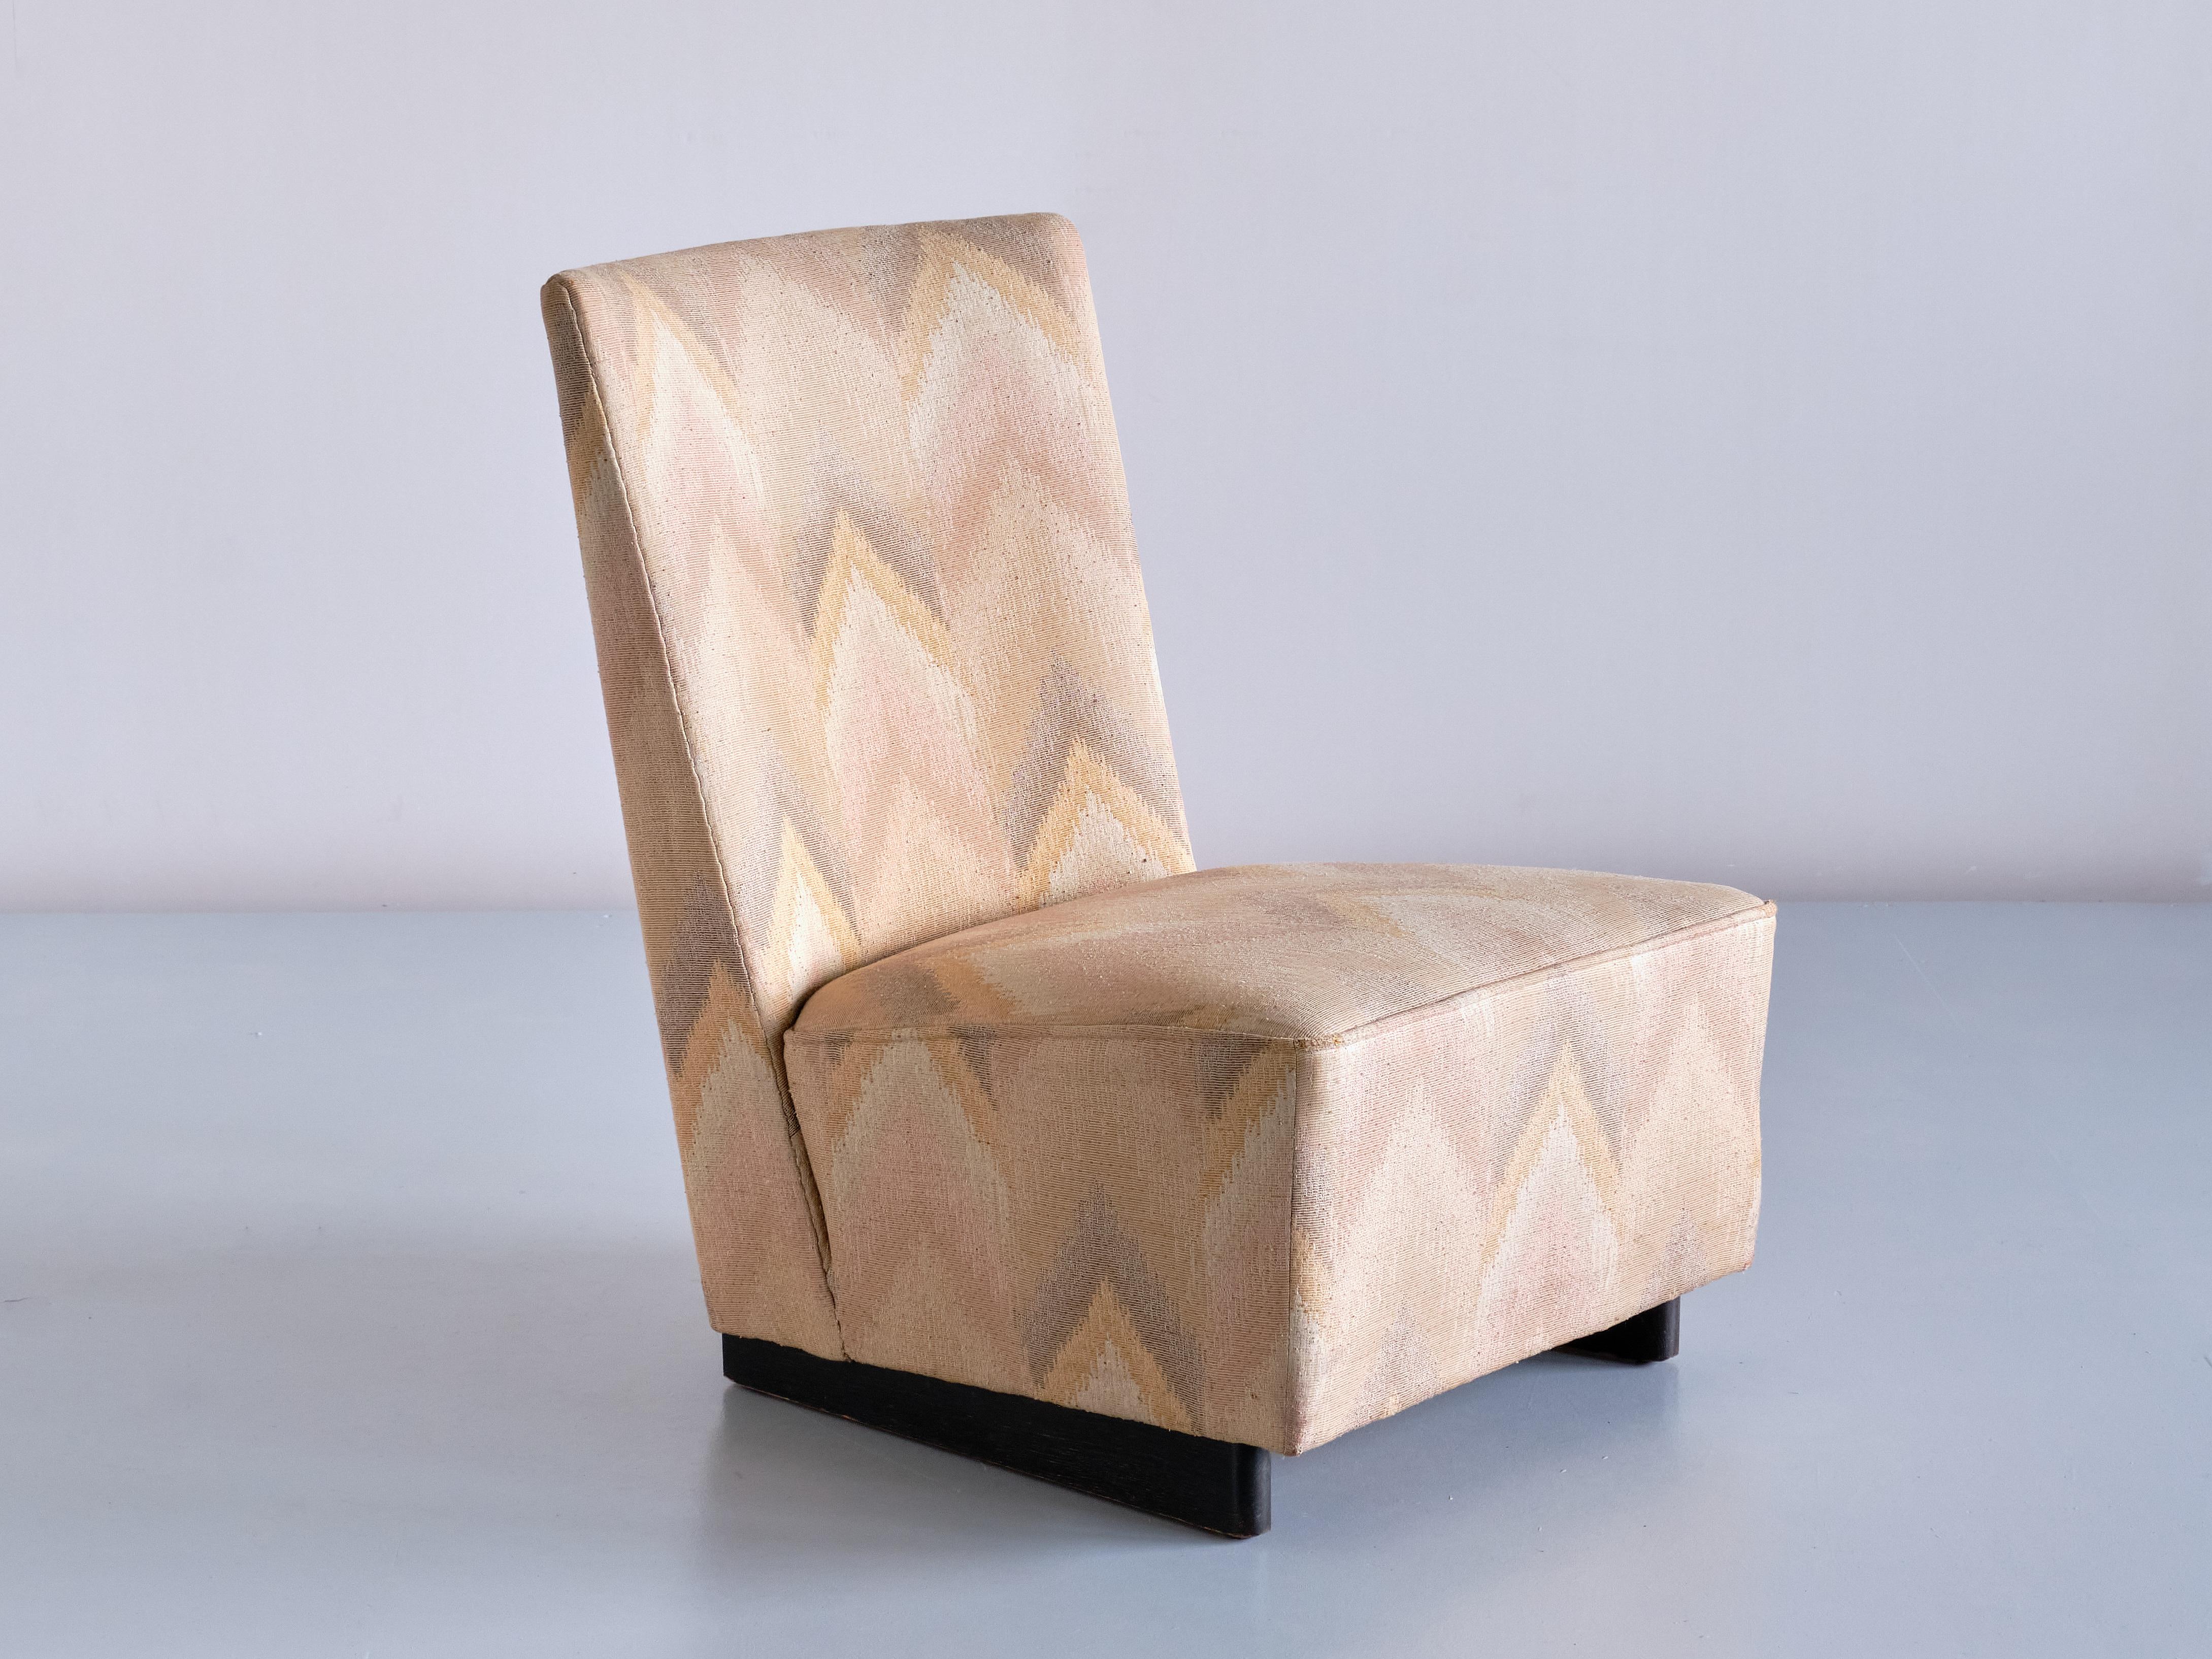 This striking low lounge or slipper chair was designed by Willem Penaat and manufactured by Metz & Co in Amsterdam in 1935. The modernist design is marked by the angled backrest and geometric shape. The chair retains its original fabric, printed in